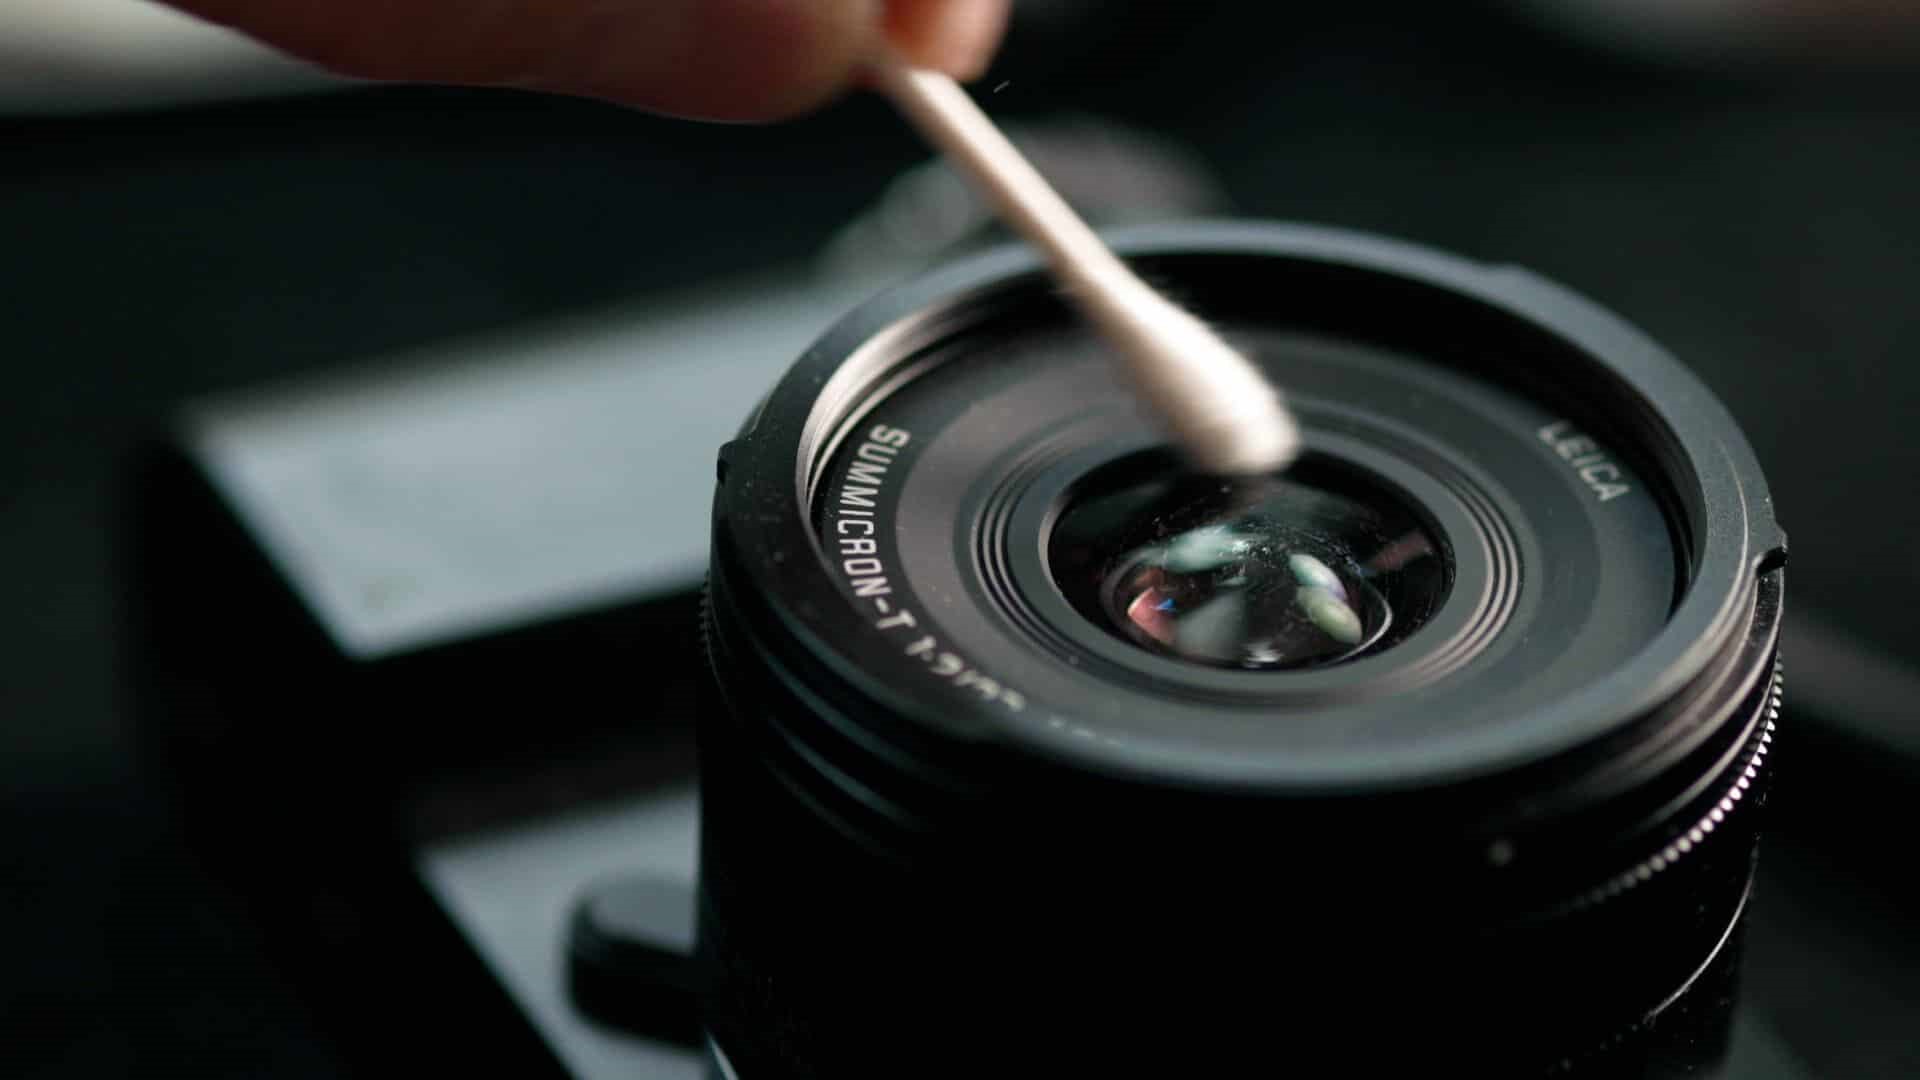 How To Clean A Camera Lens